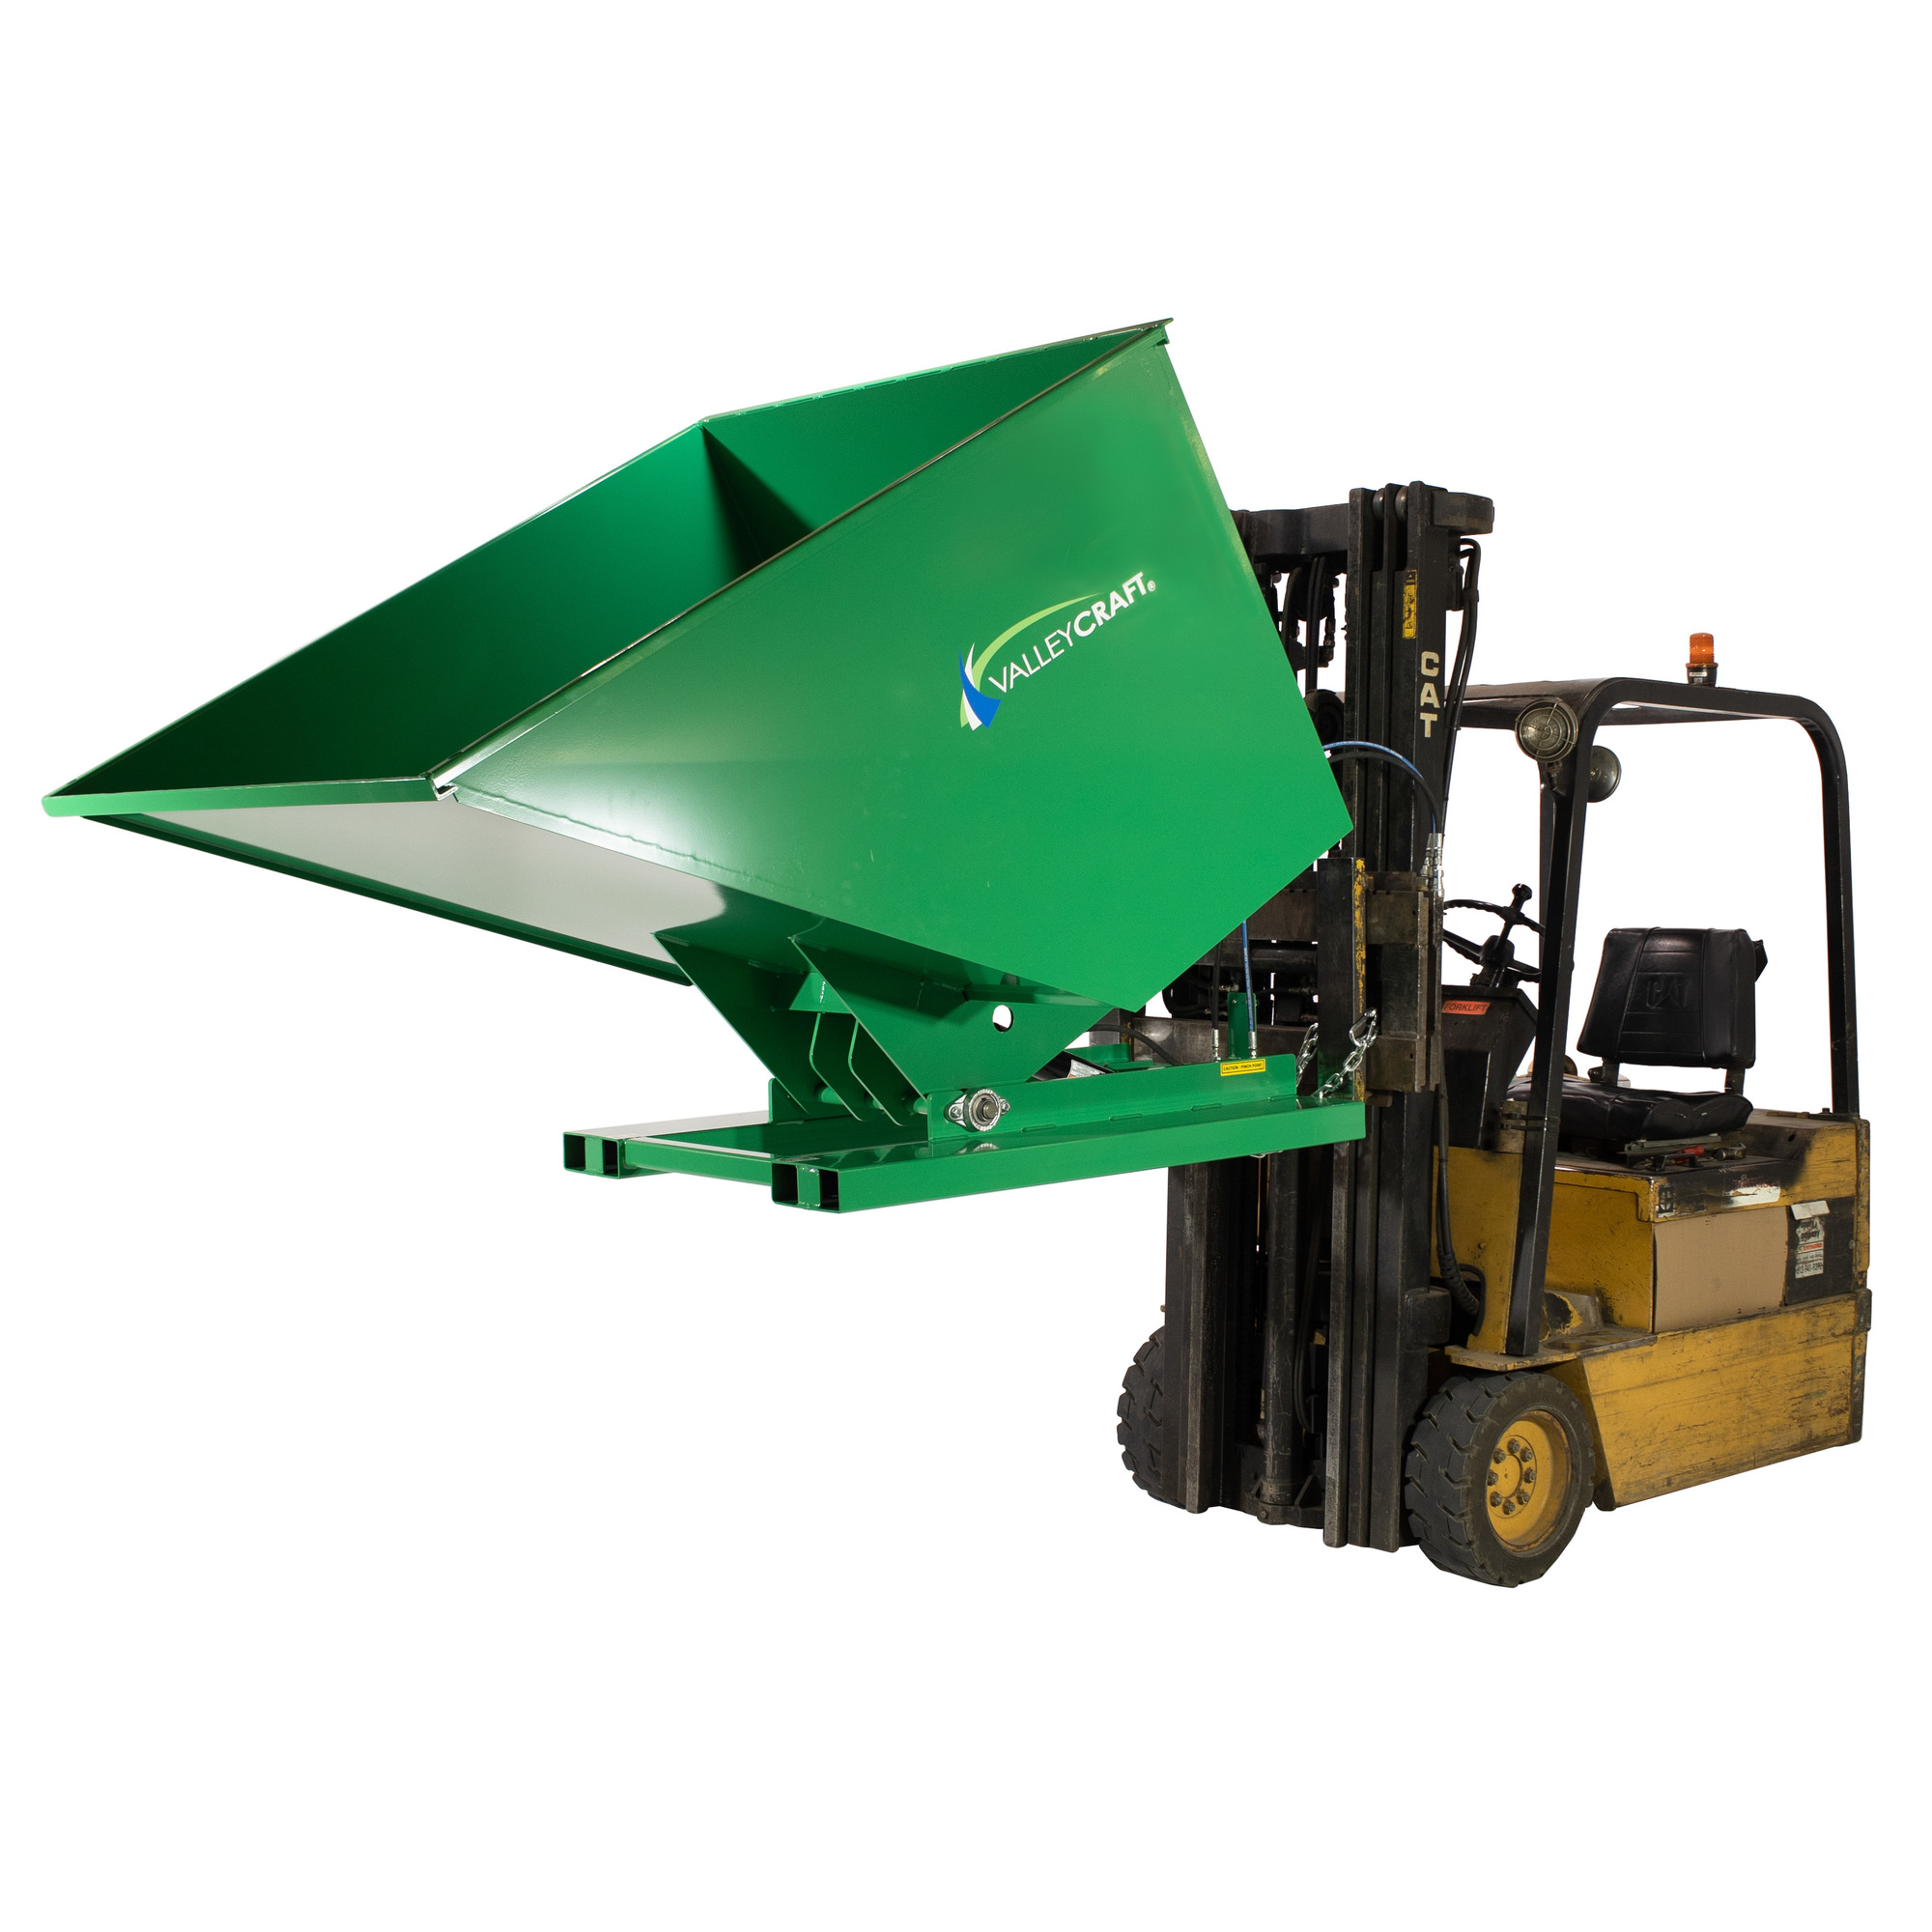 Valley Craft, Powered Self-Dumping Hopper Forklift Attachment, Capacity 6000 lb, Volume 2 ydÂ³, Color Green, Model F89139